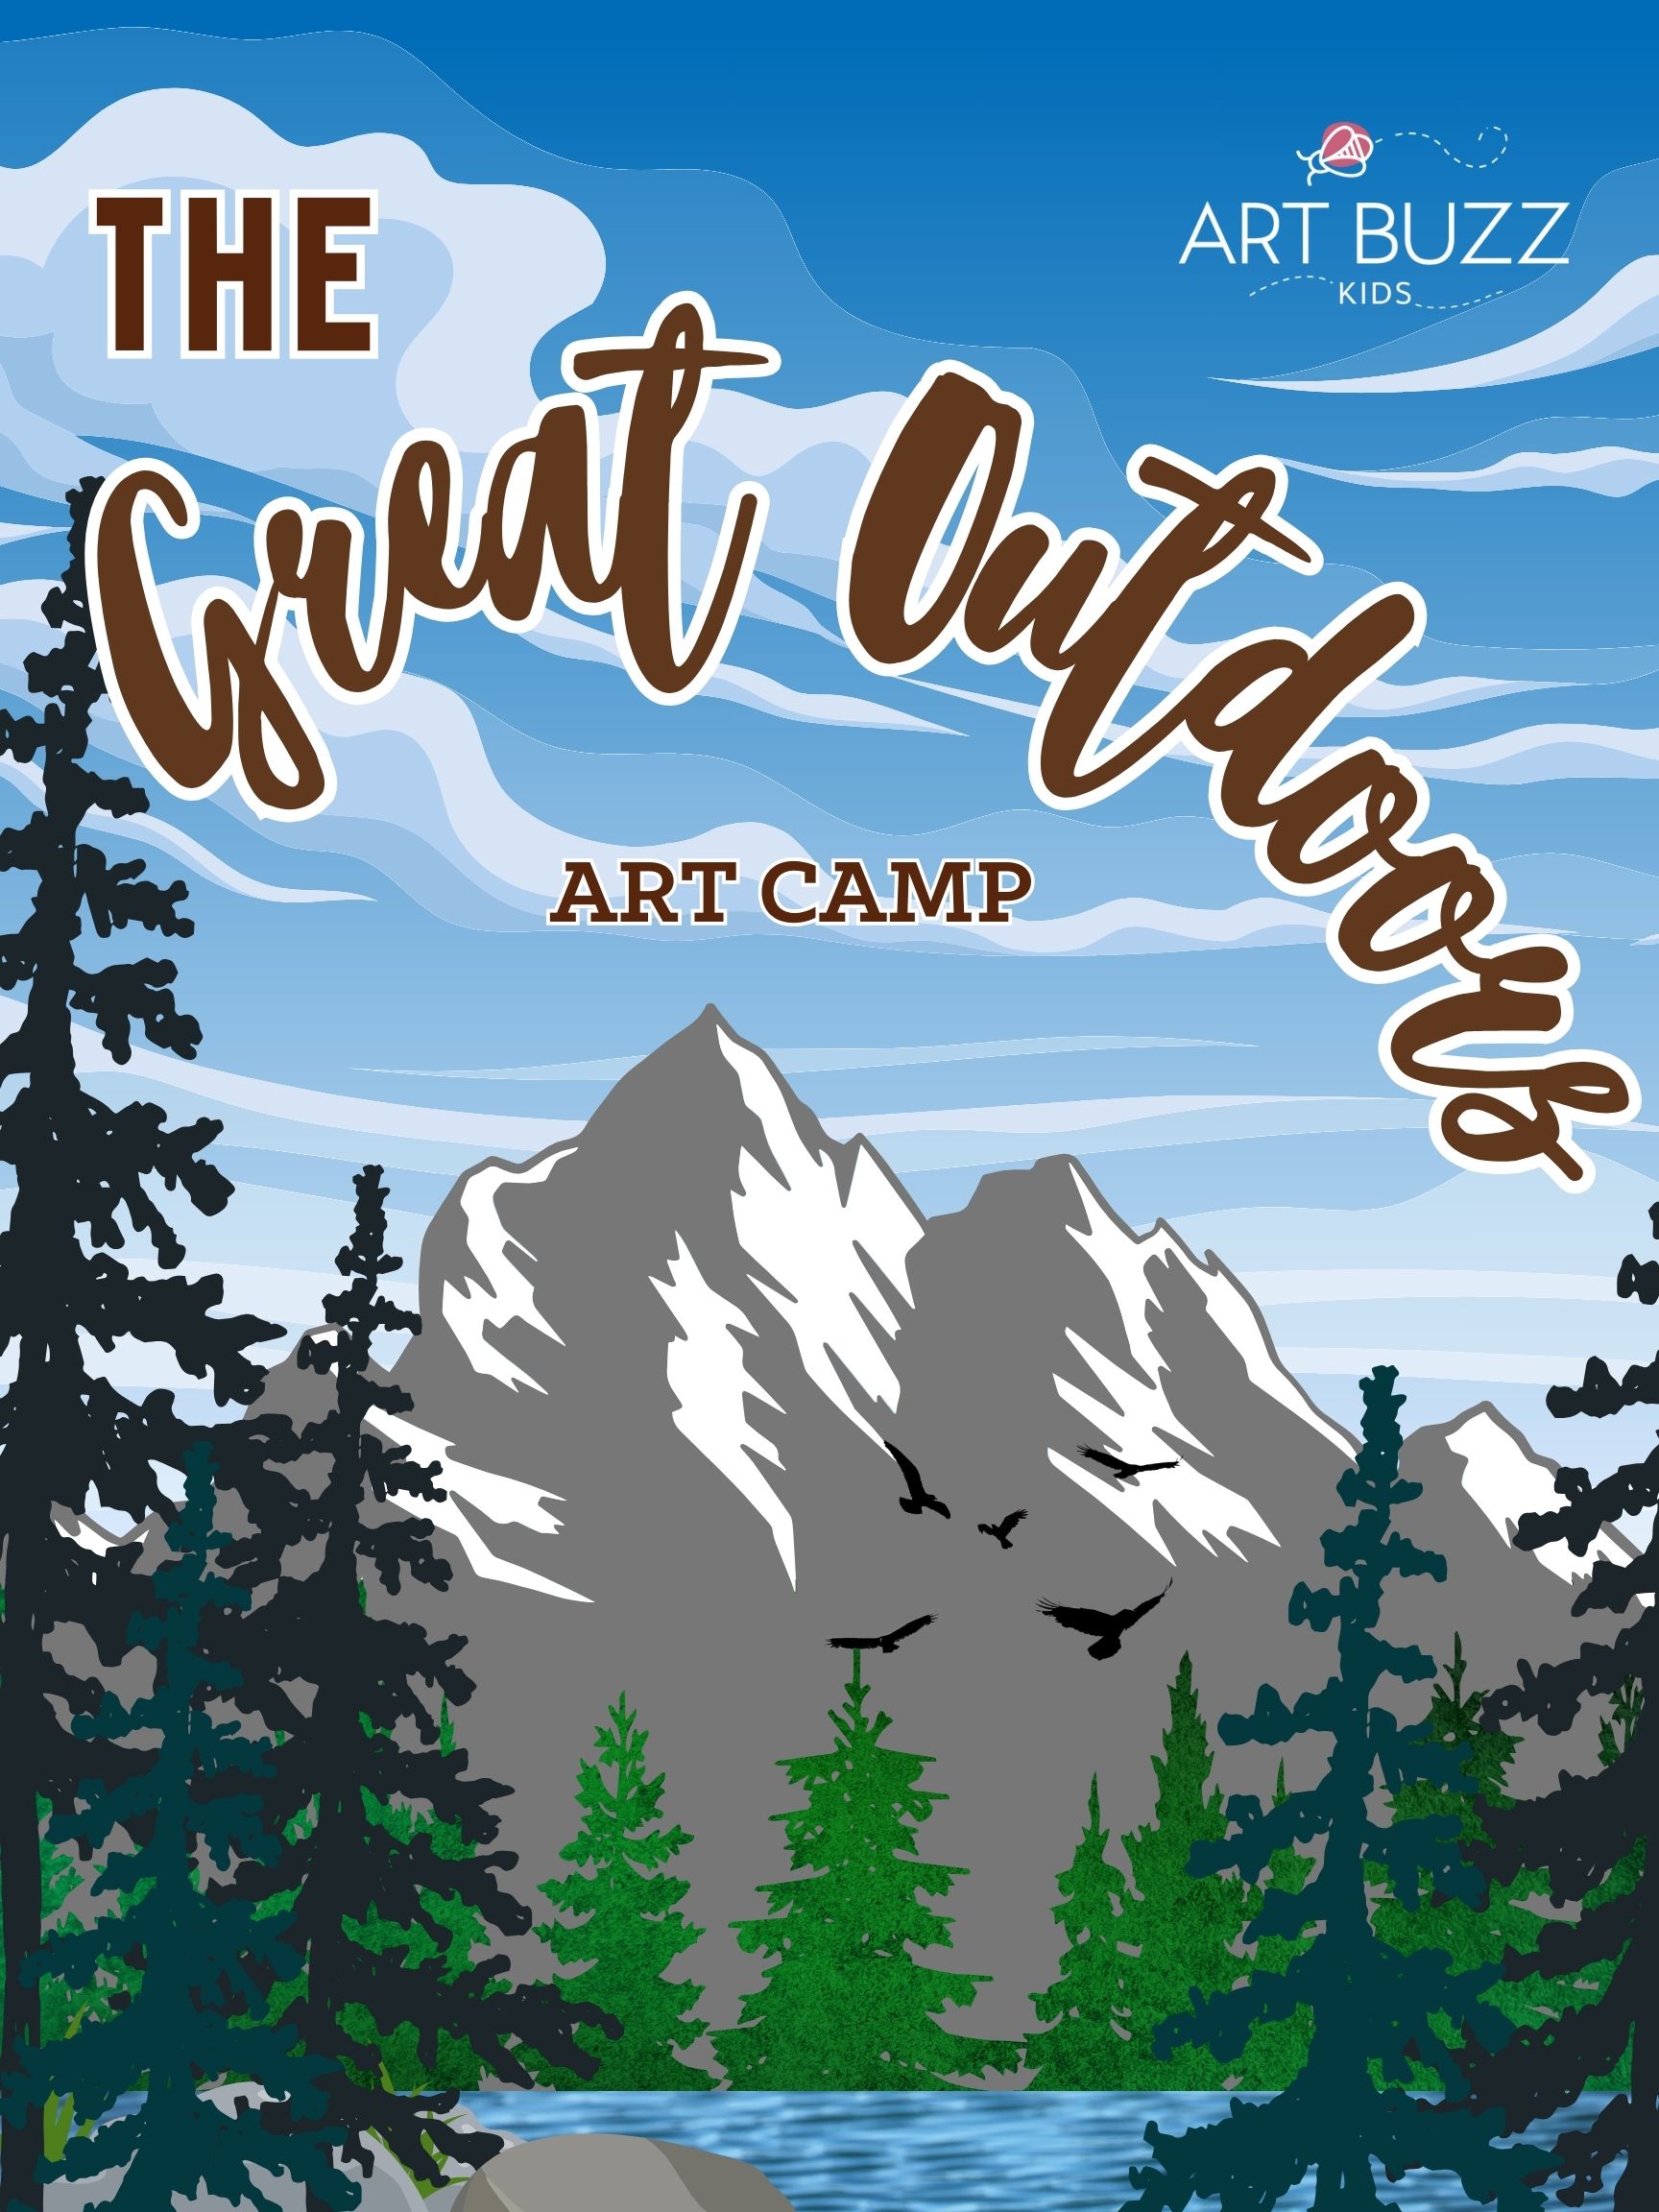 Week Long Summer Kids Art Camp: The Great Outdoors 9AM-1PM. Offered Daily. *scroll down to see paintings